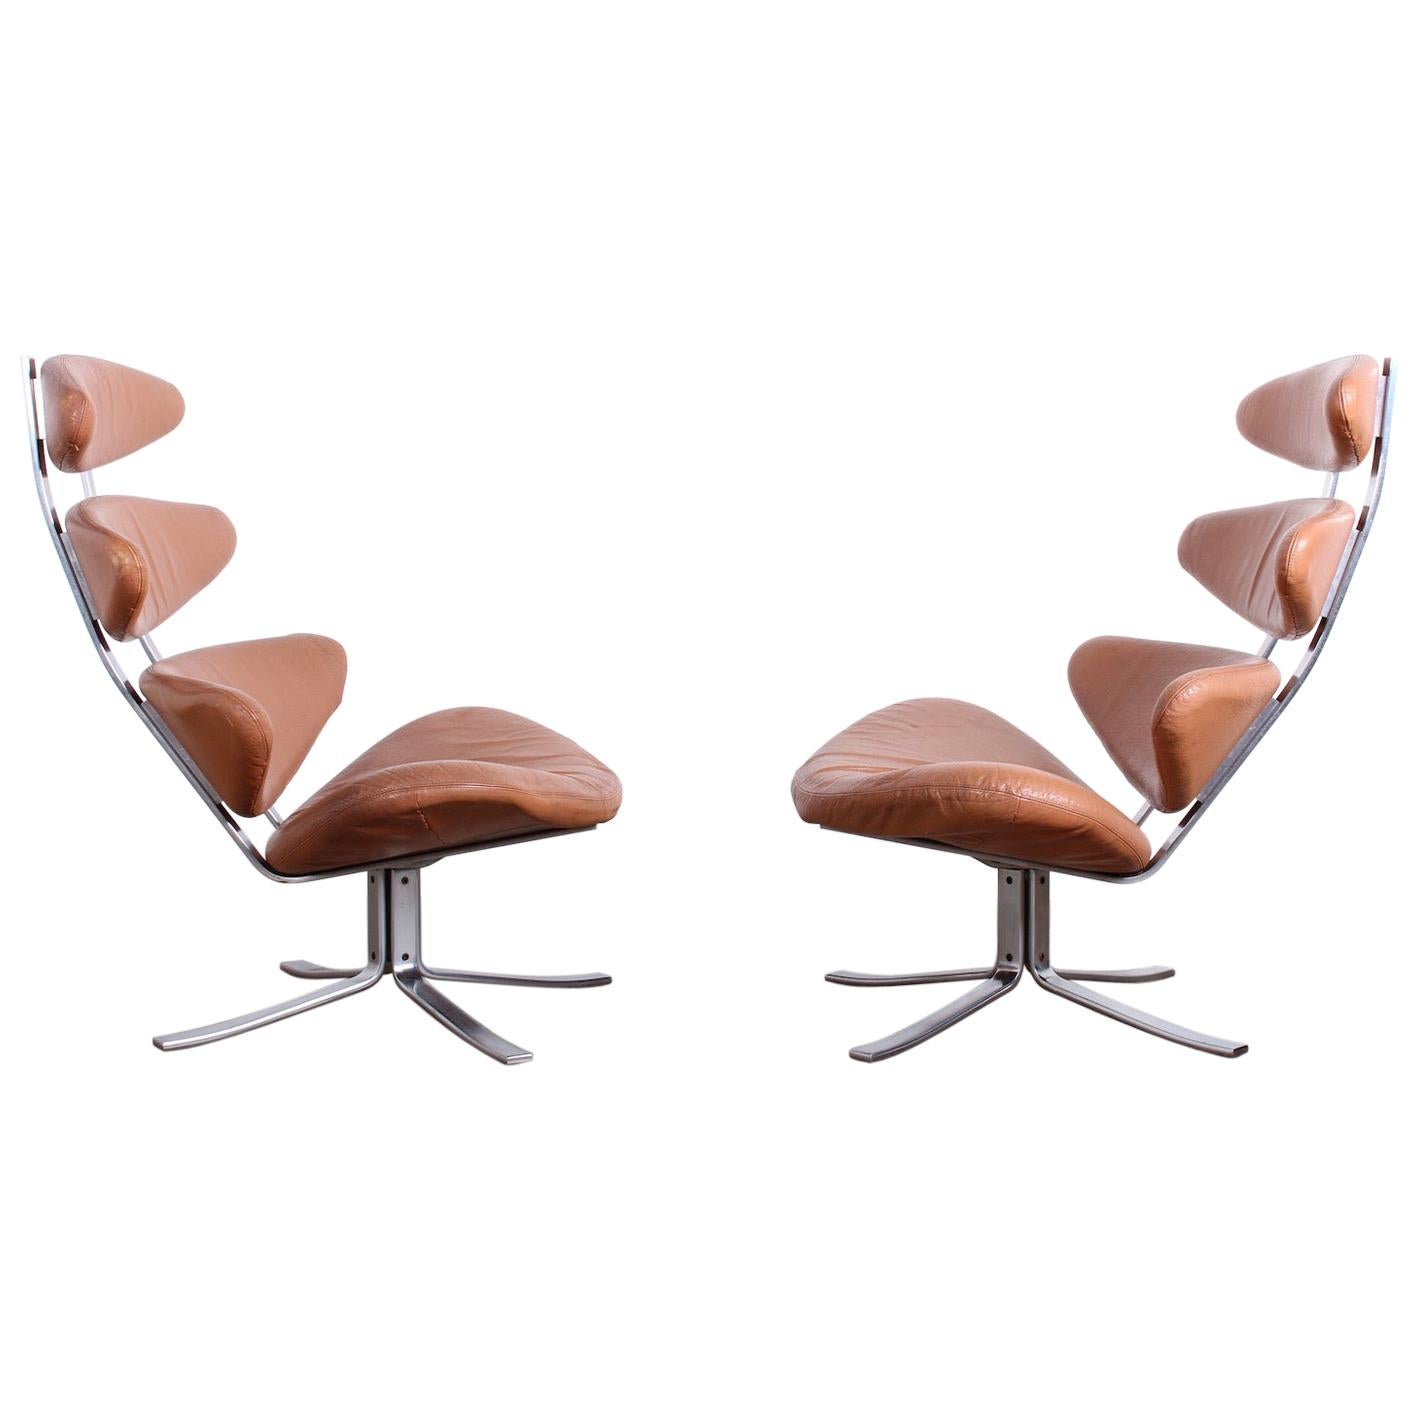 Pair of Original Leather Corona Chairs by Poul Volther